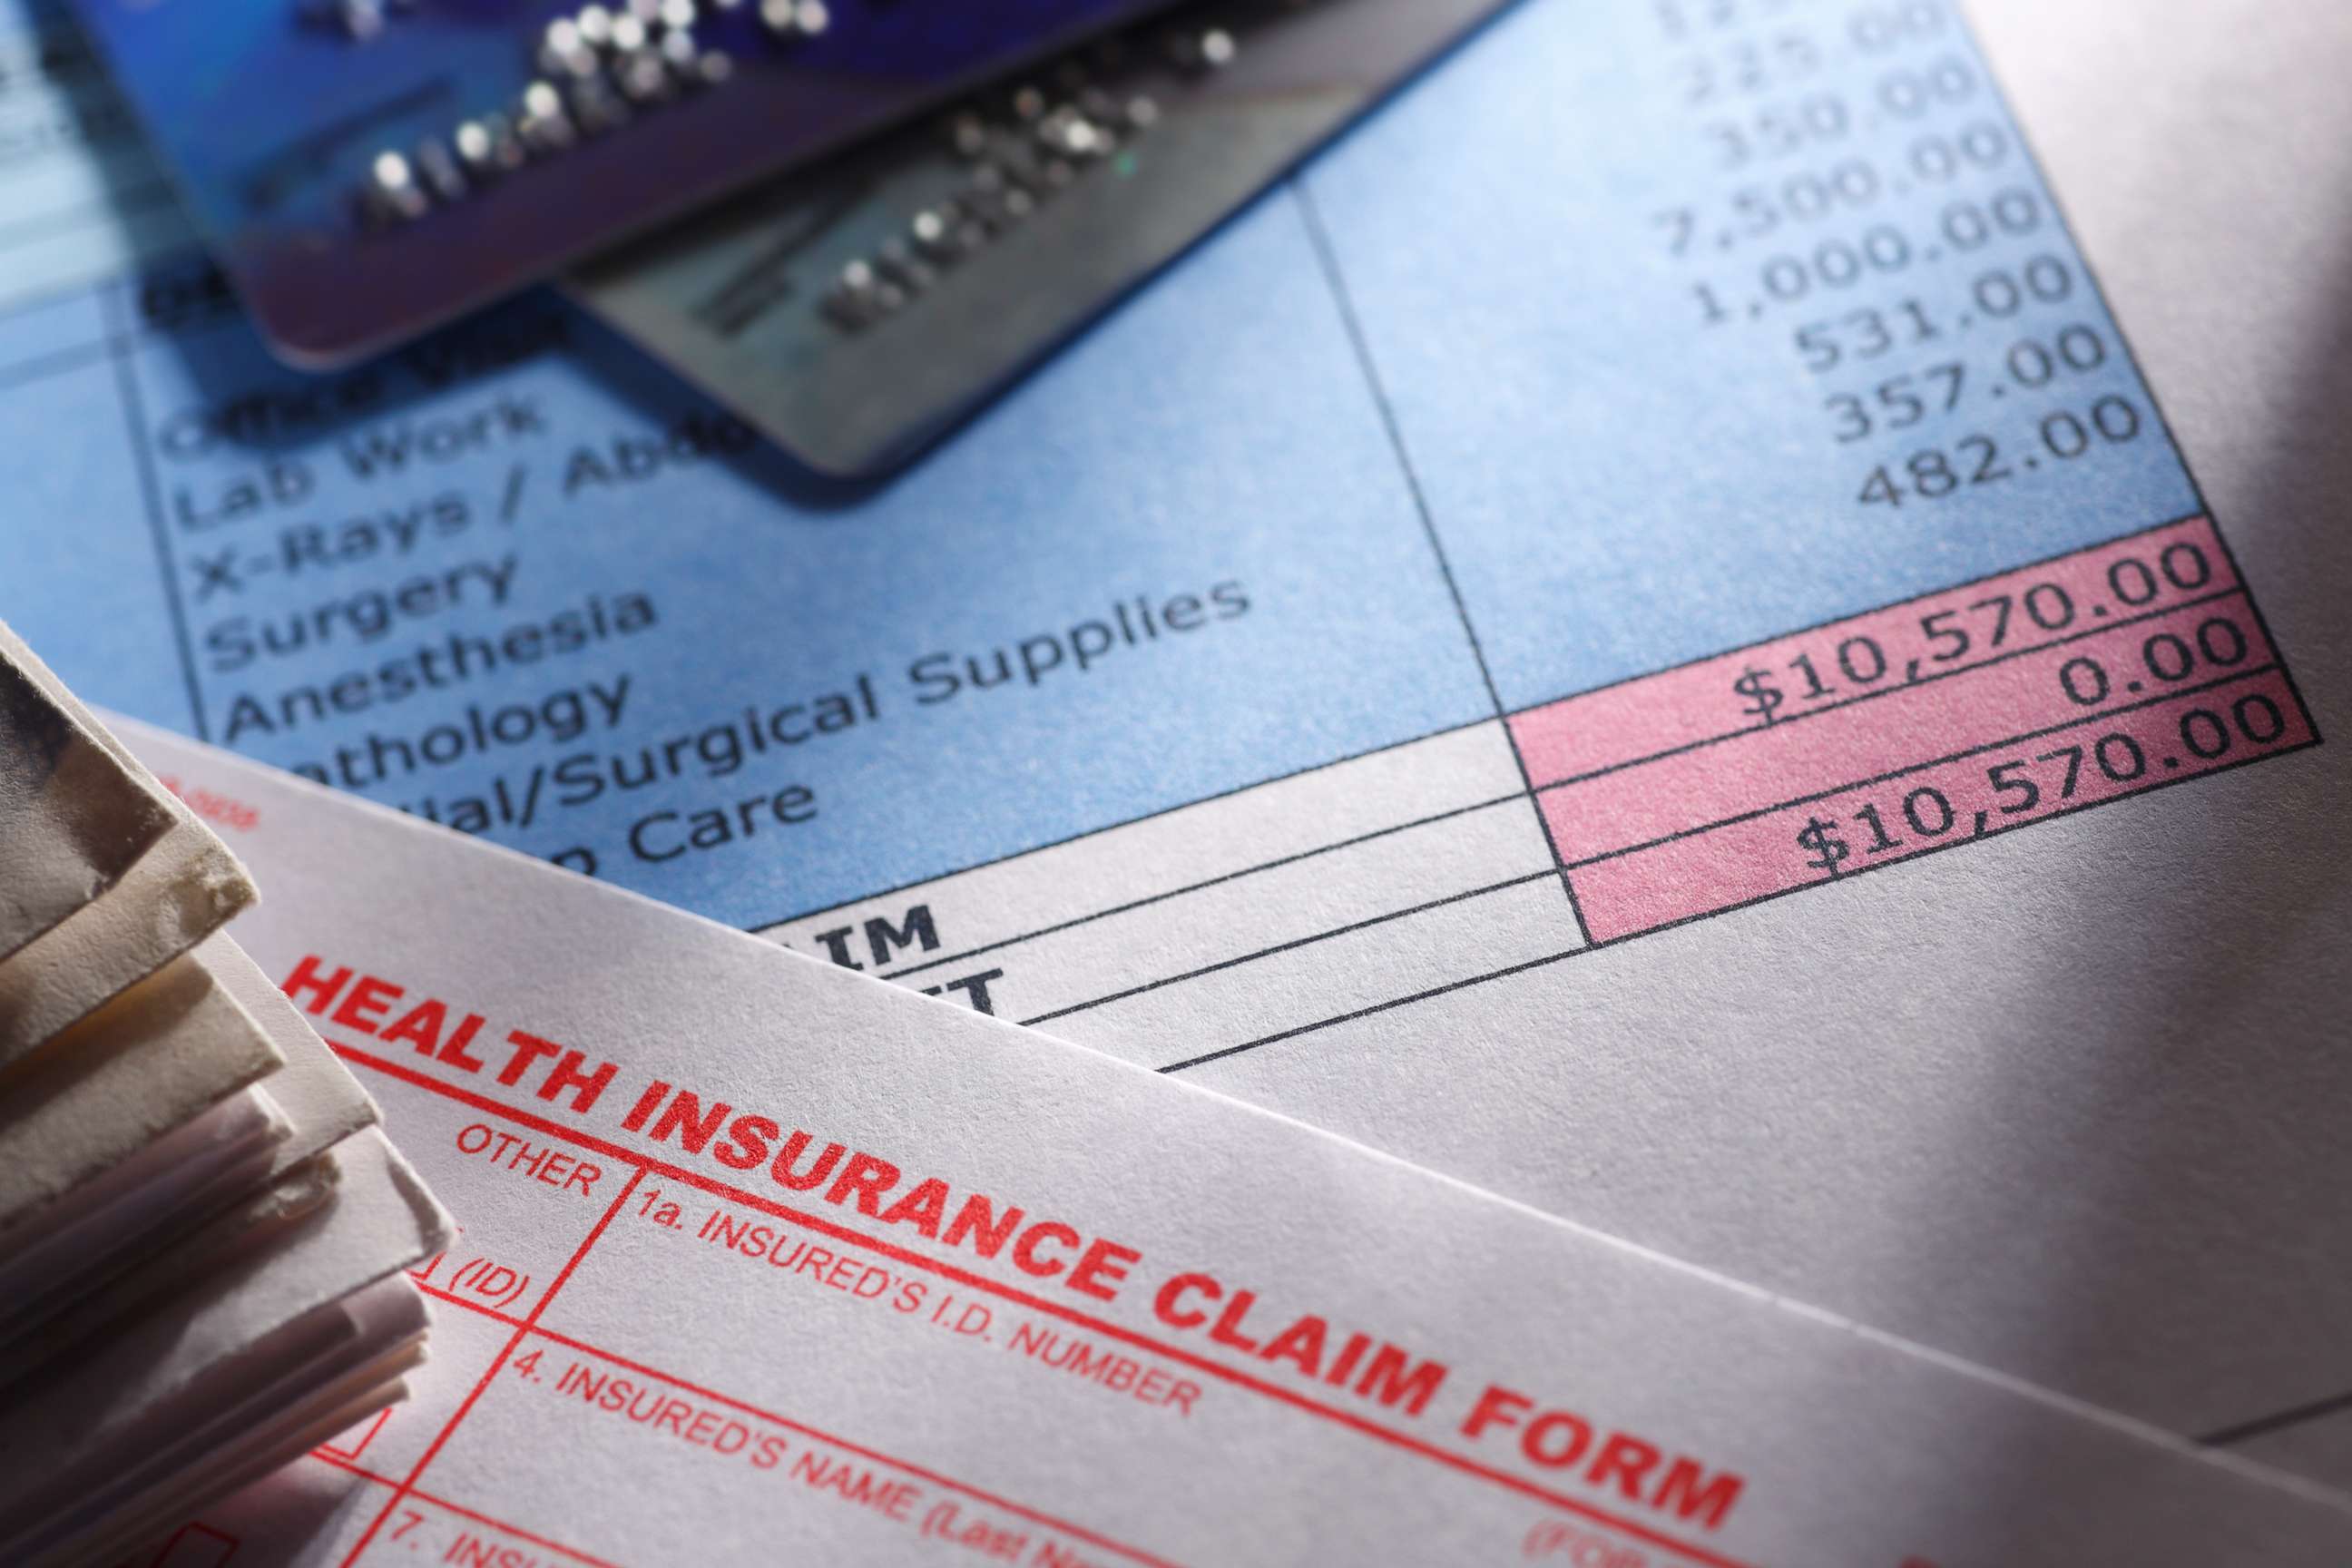 PHOTO: A health insurance claim form is picture next to a hospital bill in an undated stock photo.